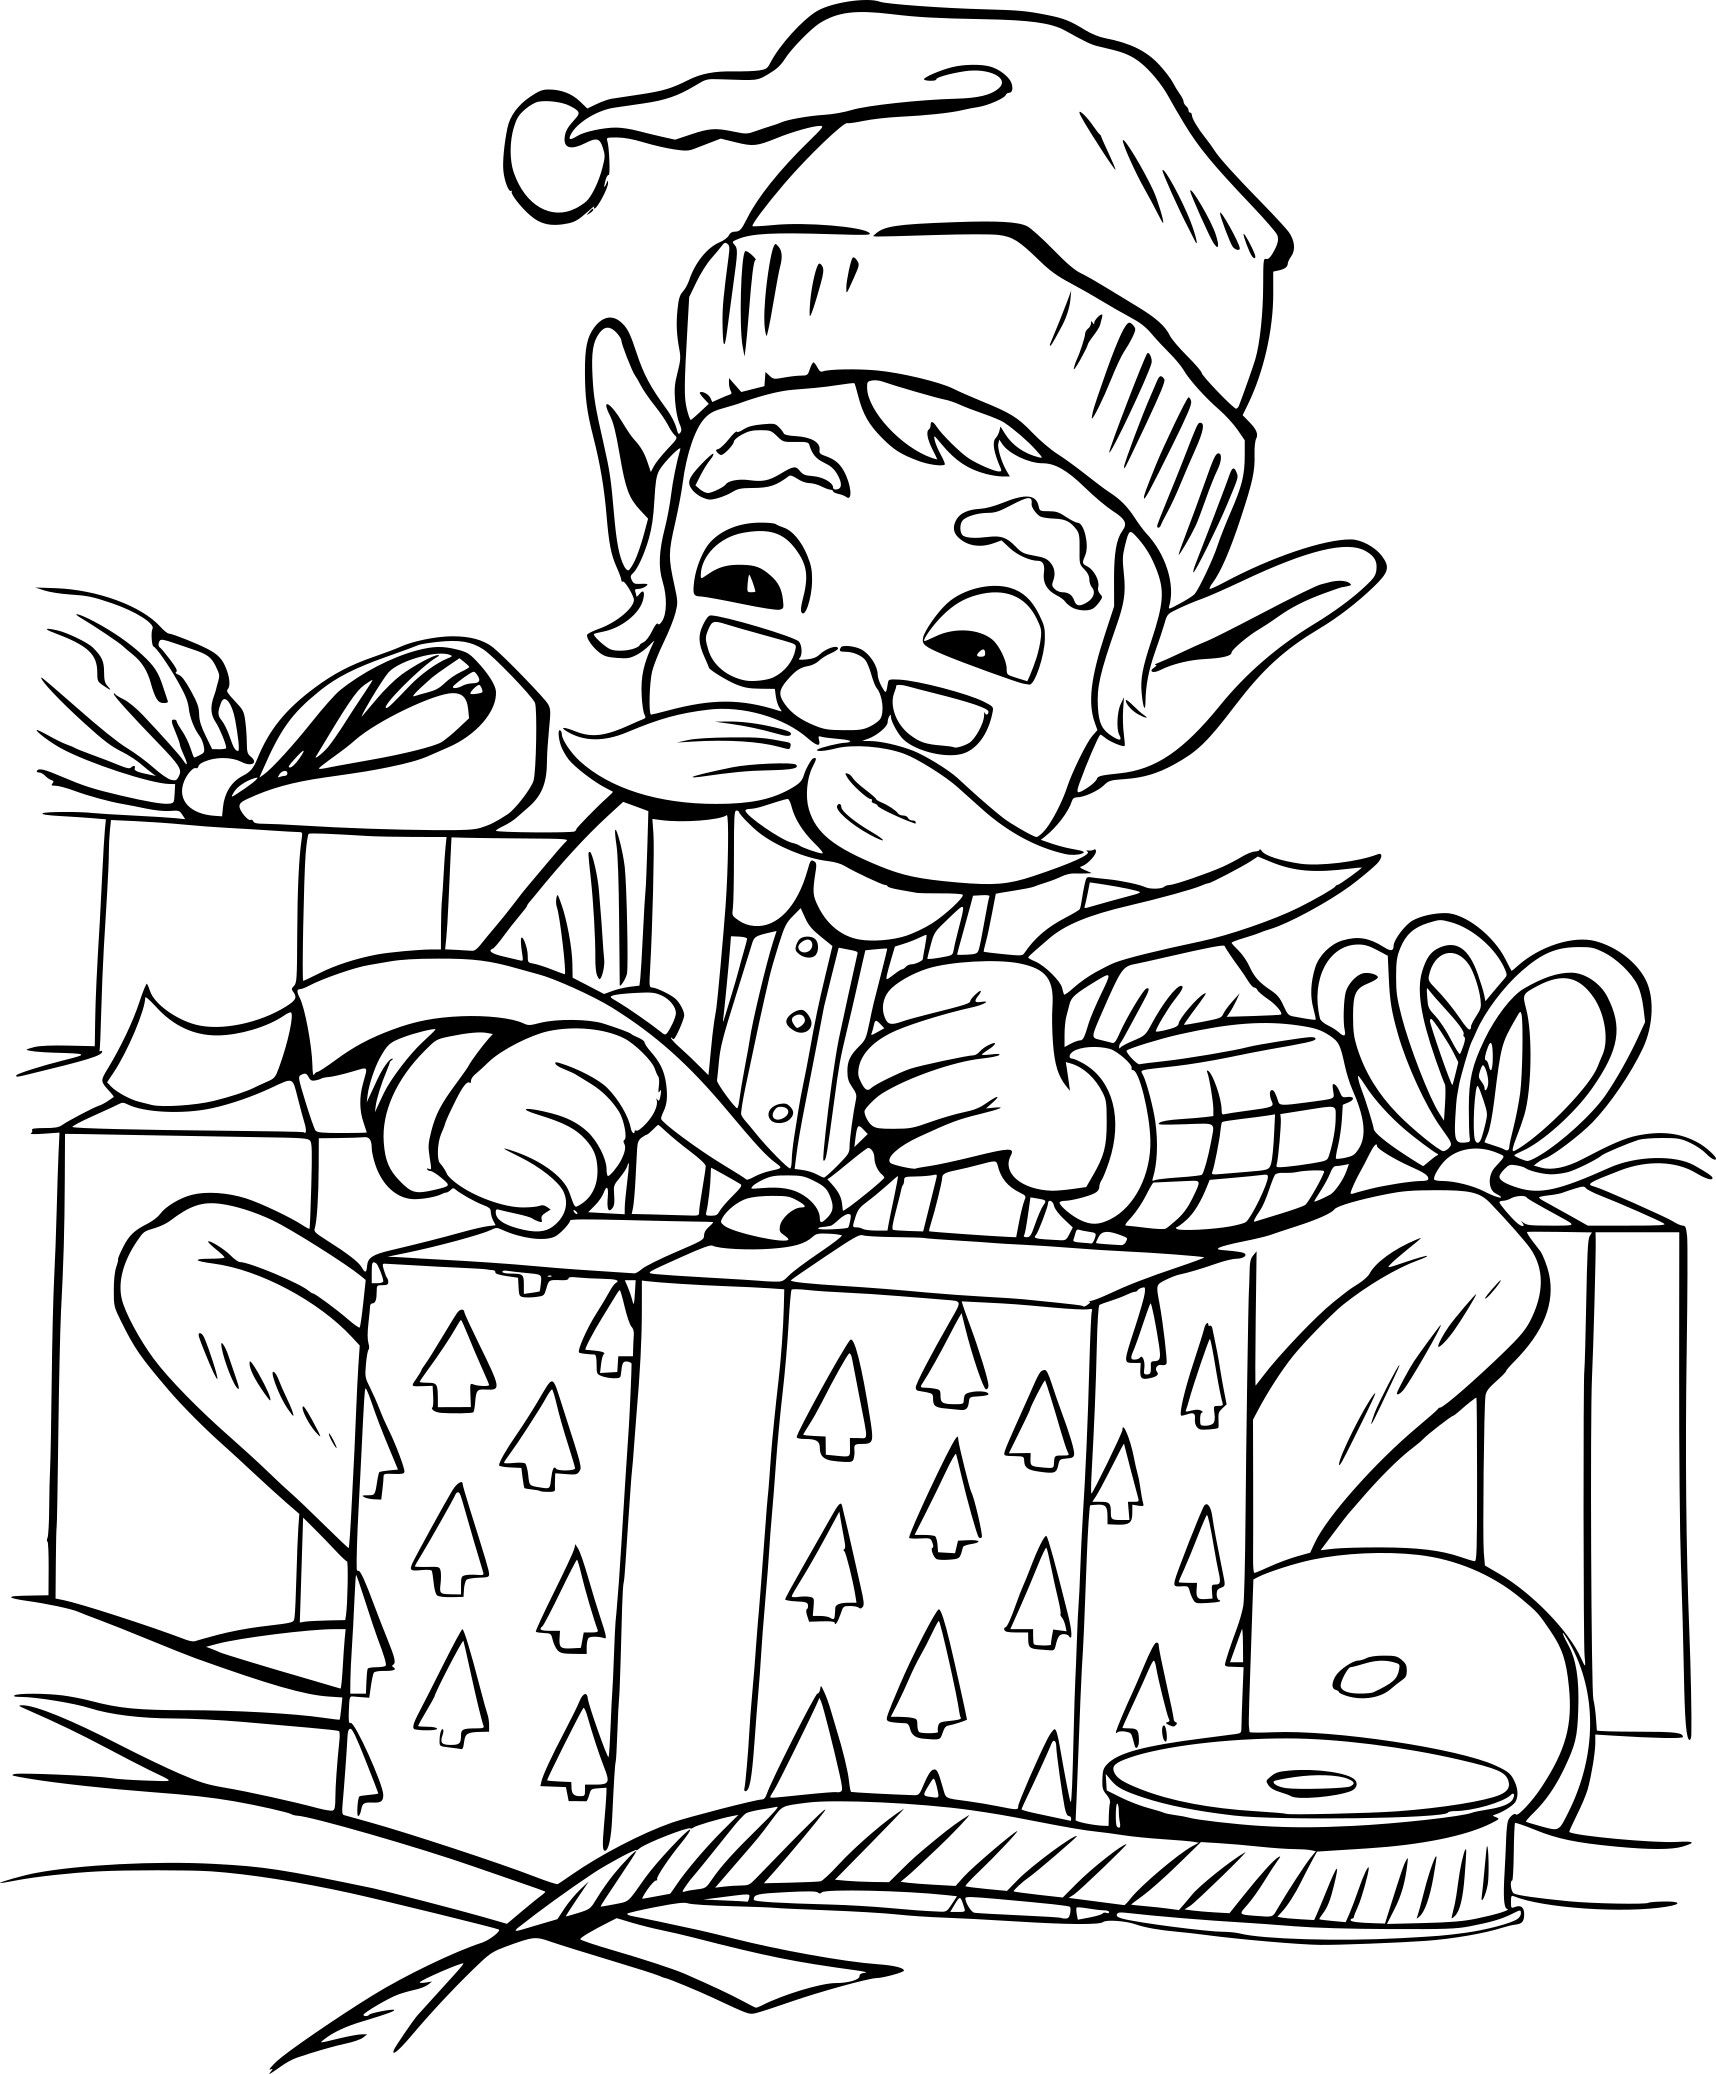 Christmas Elf coloring page